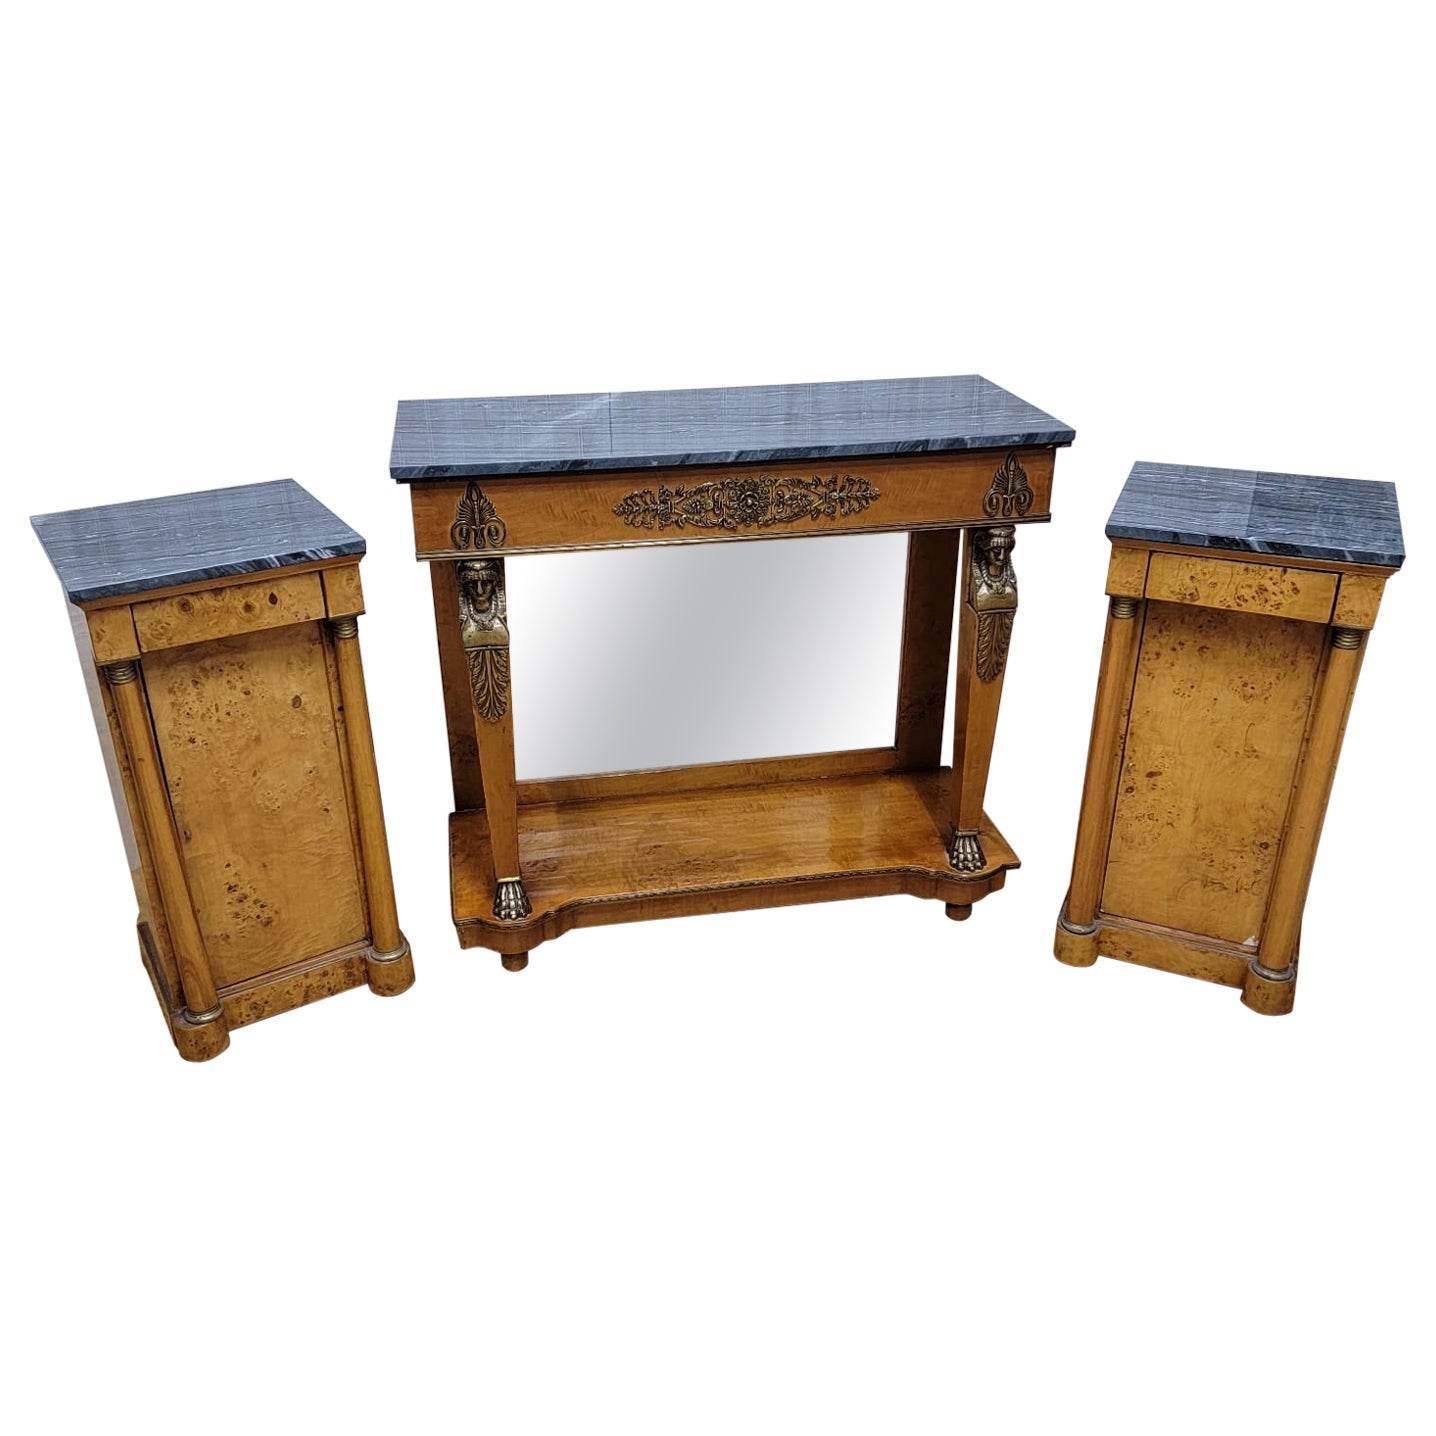 Antique Biedermeier Mirror Back Pier Console Table with 2 Marble Top Side Chests